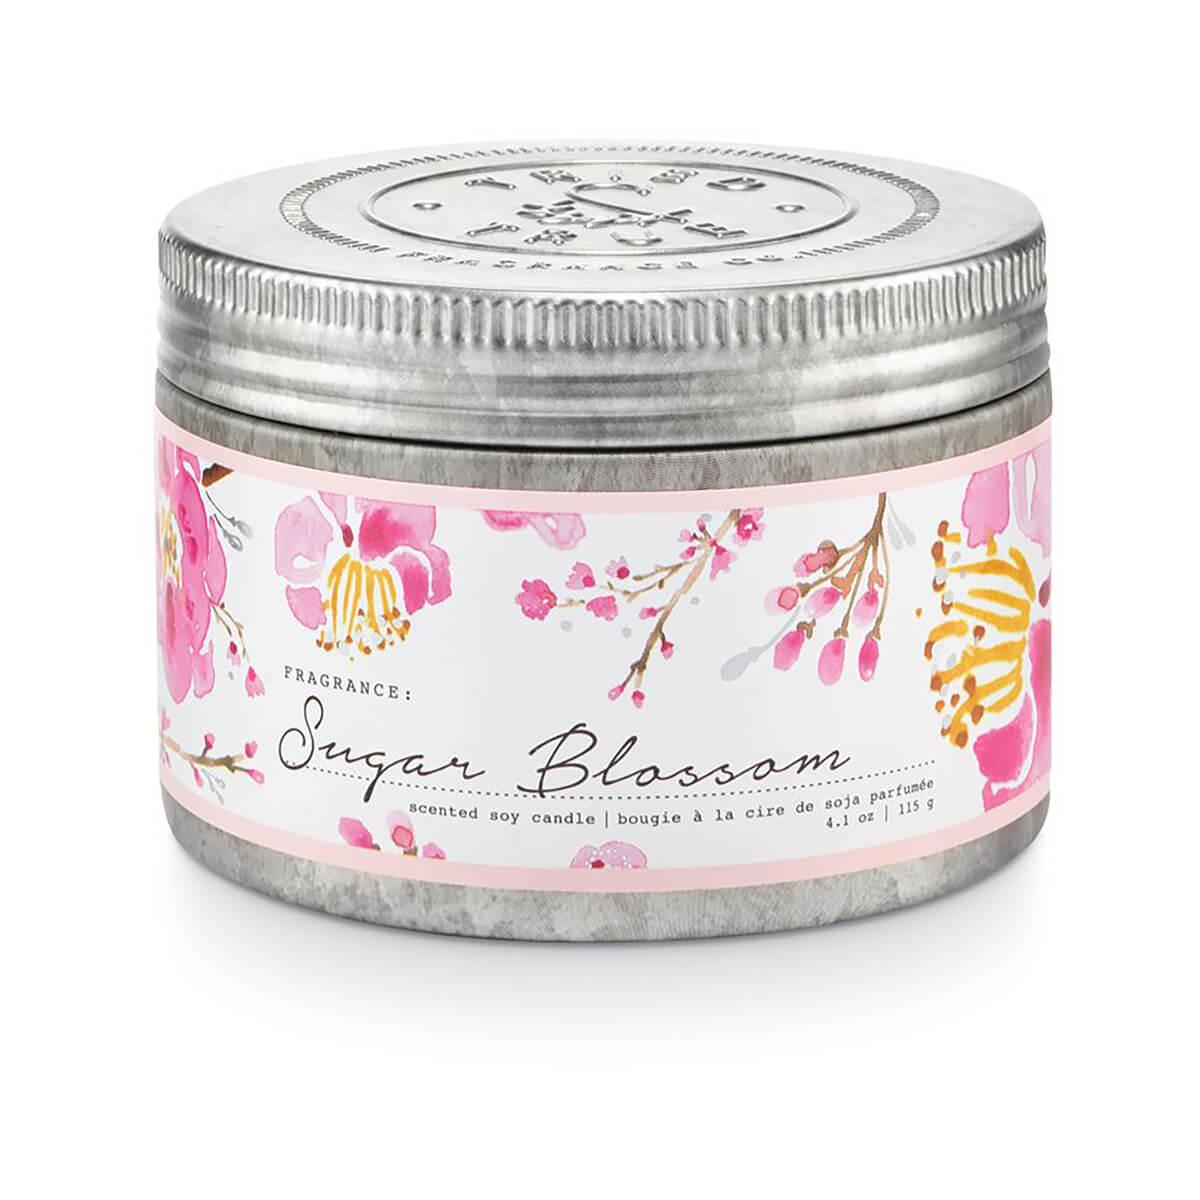  Tried & True Sugar Blossom Scented Soy Candle - 4.1 Ounce